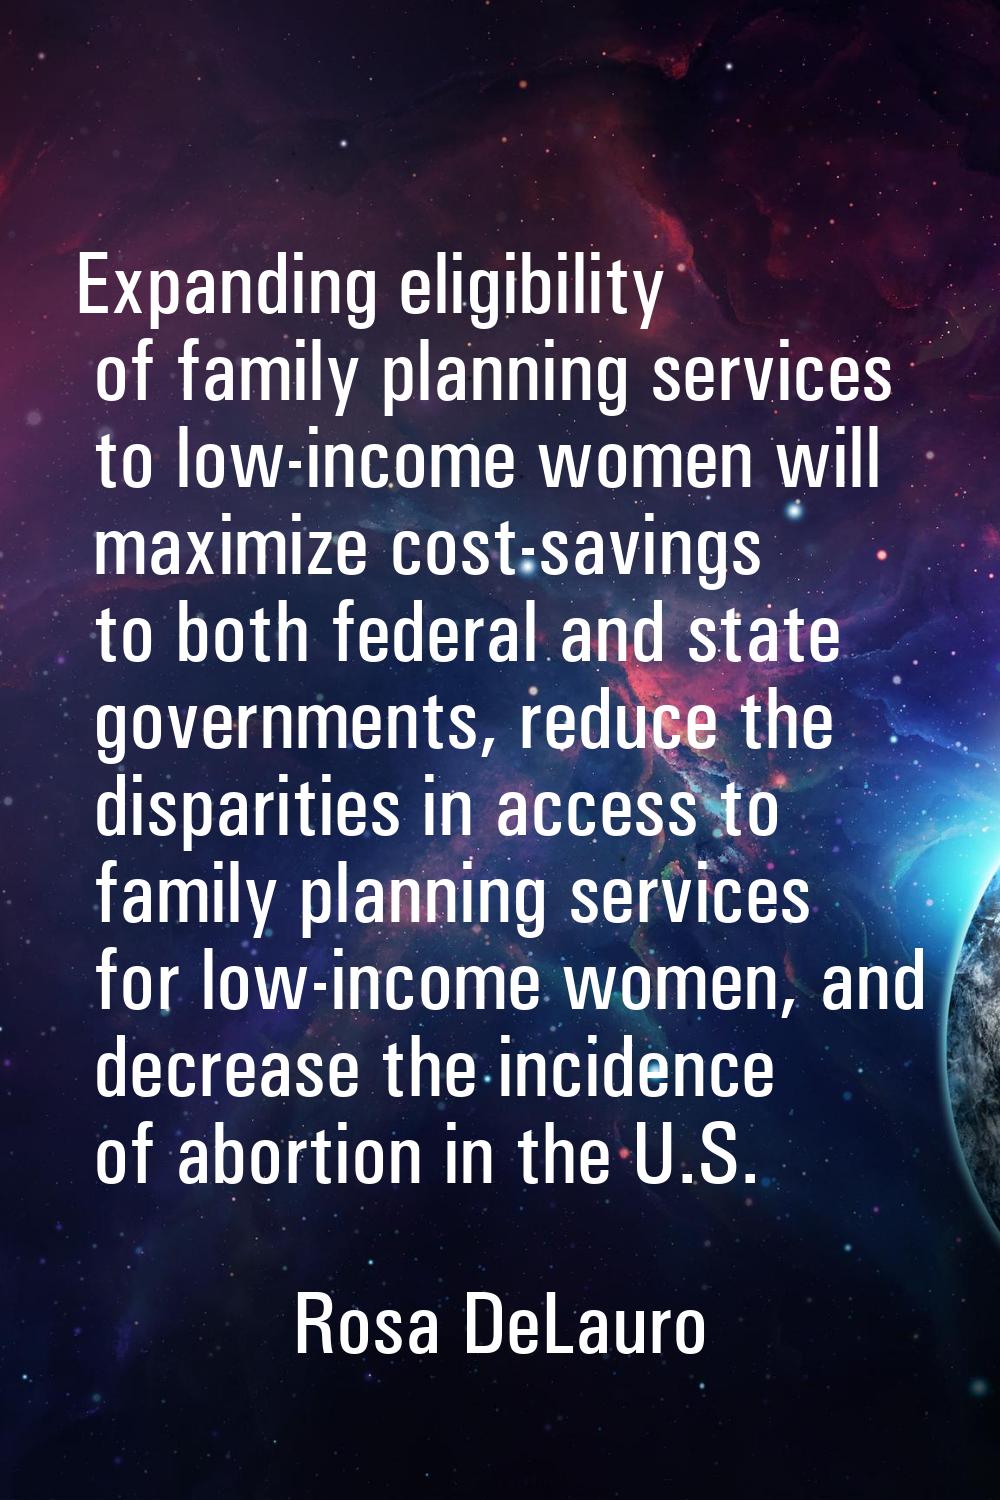 Expanding eligibility of family planning services to low-income women will maximize cost-savings to